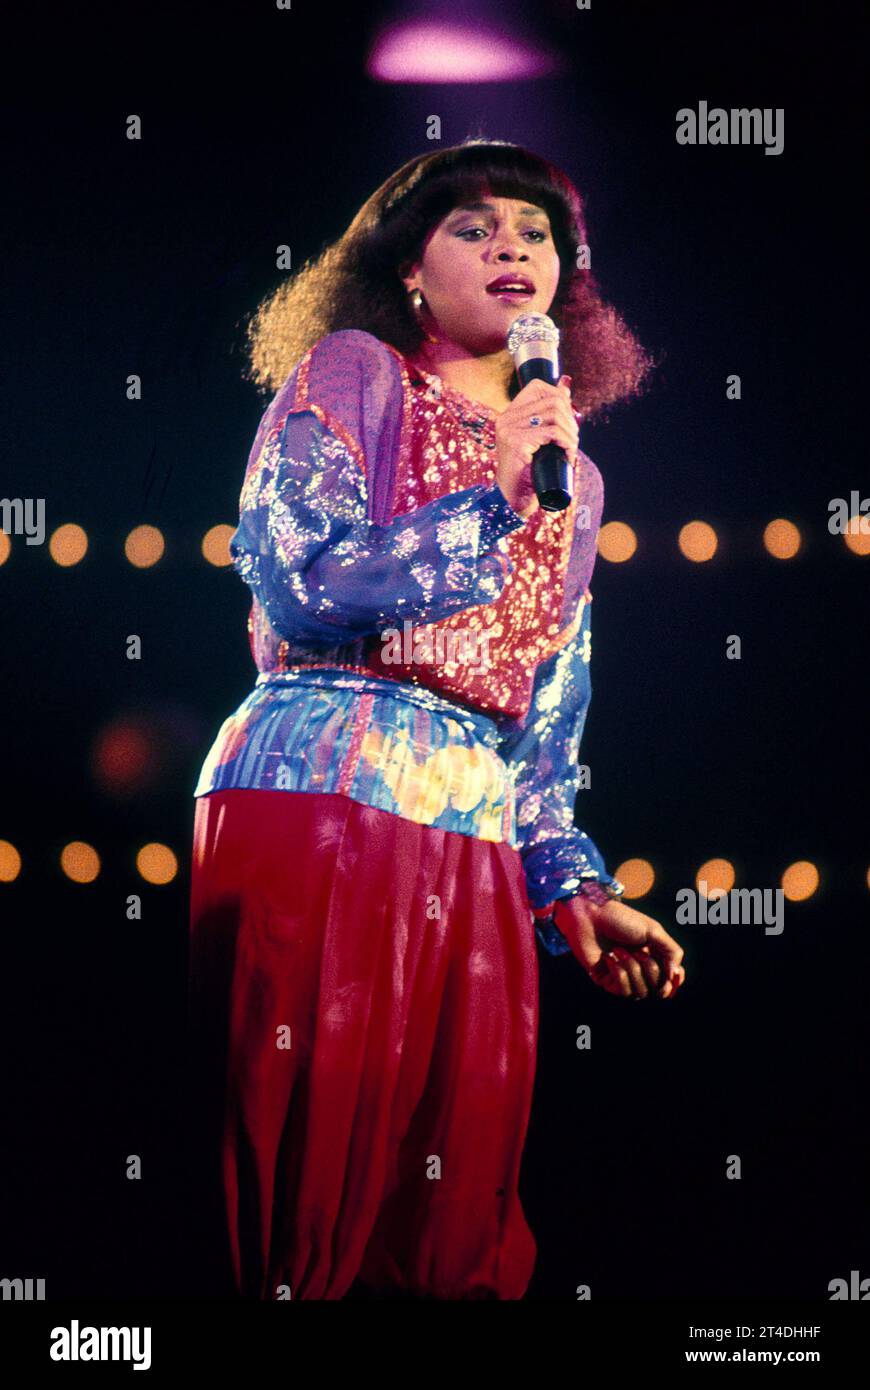 DENIECE WILLIAMS ;E8320 ;   Credit: Lynn Mcafee / Performing Arts Images www.performingartsimages.com Stock Photo